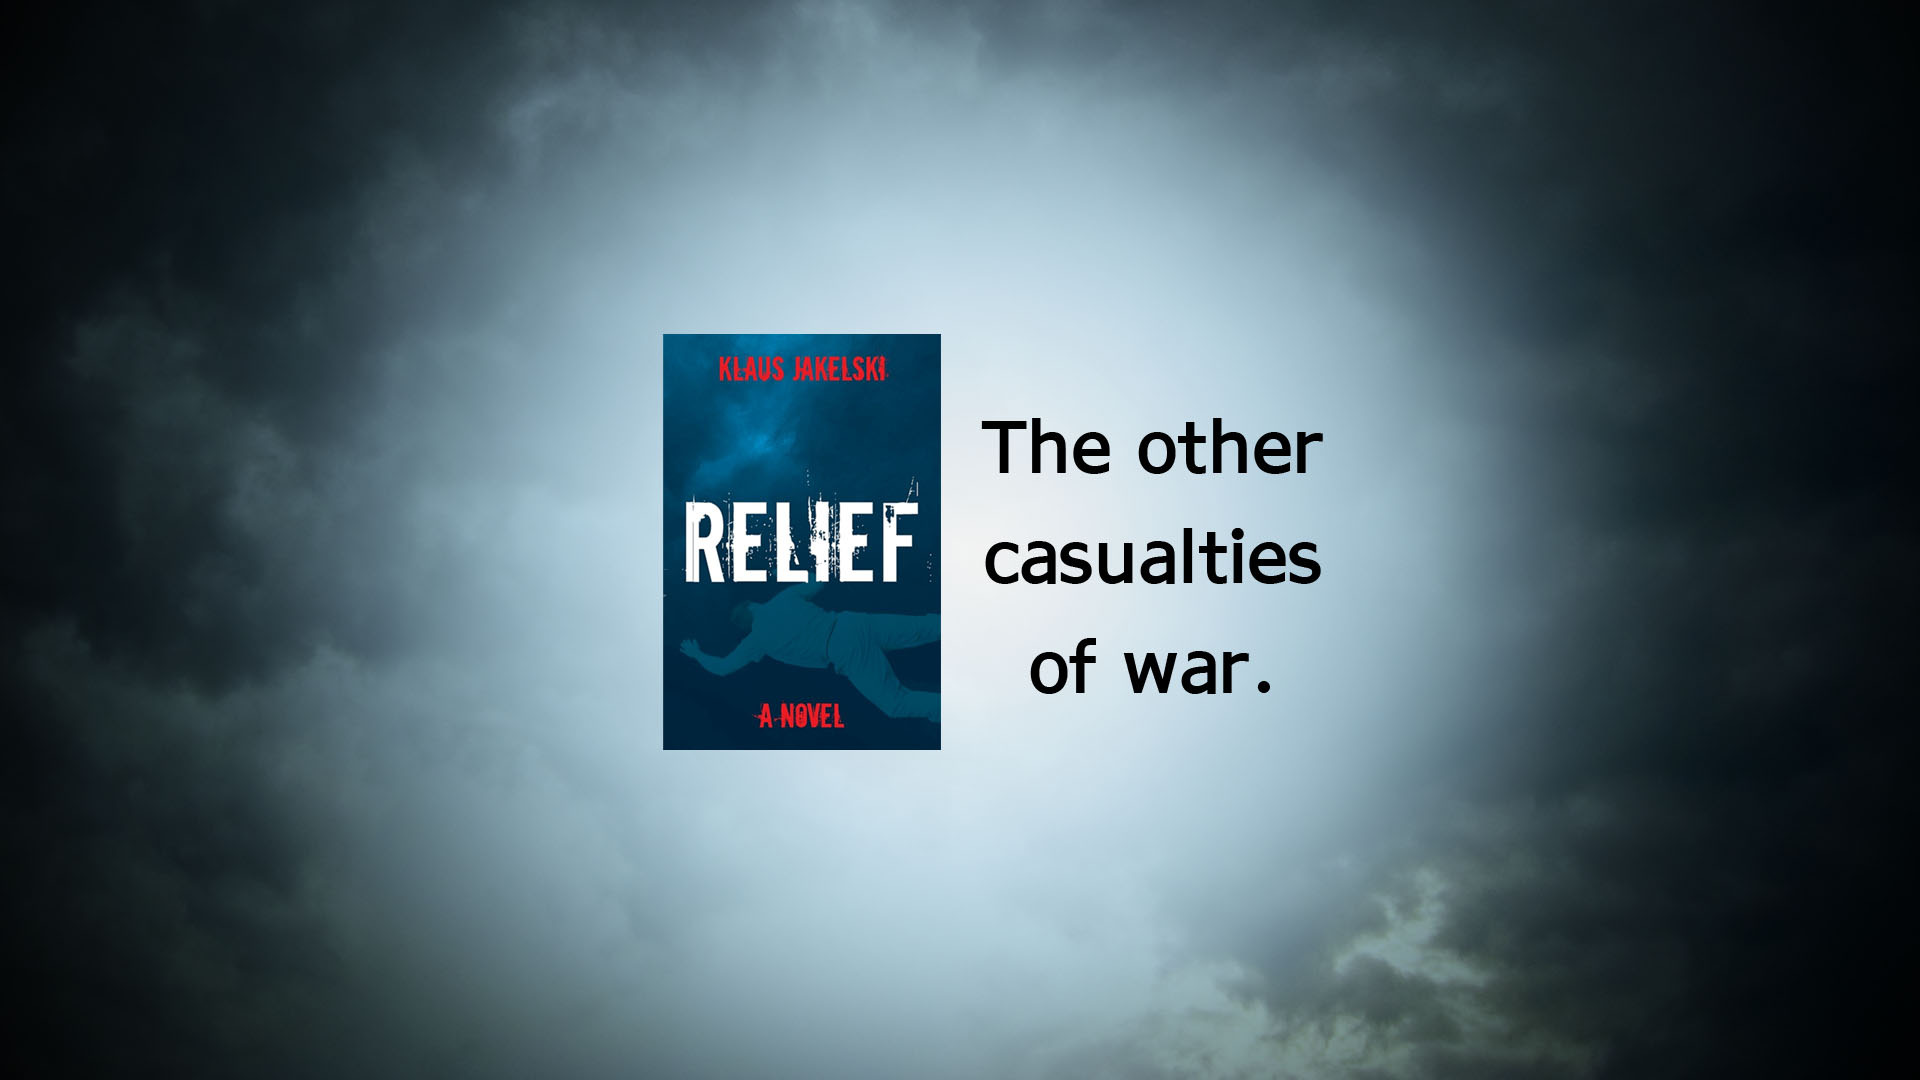 Book - Relief - The other casualties of war.